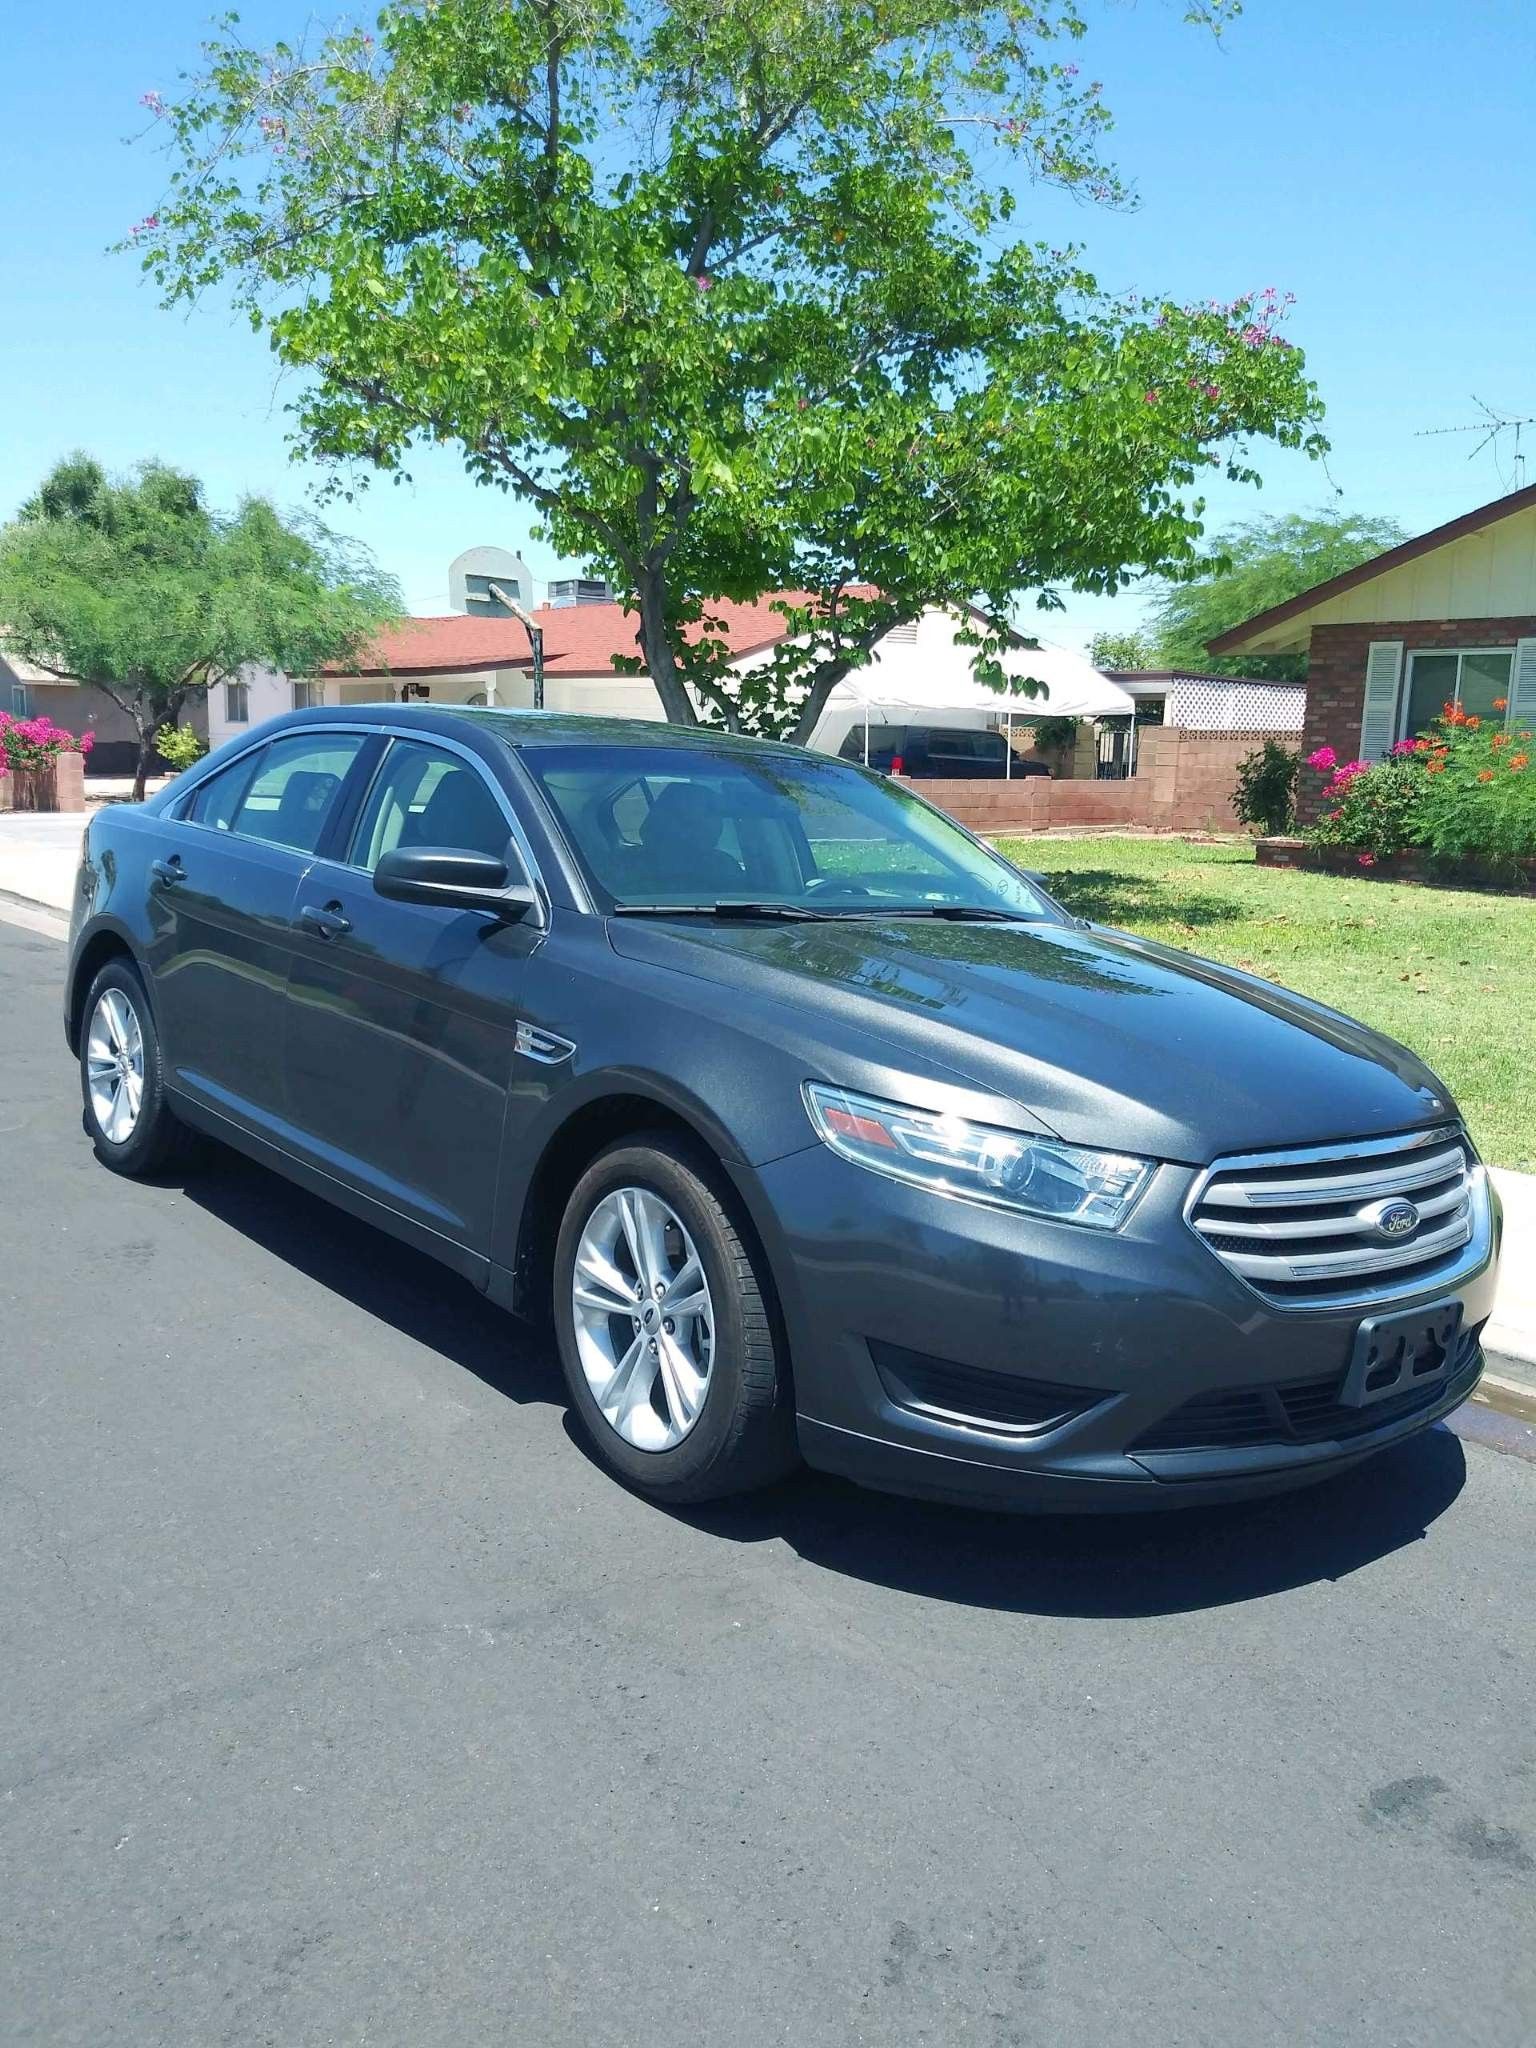 2018 Ford Taurus se Very low miles like new 10K miles clean title $12900 low miles clean title